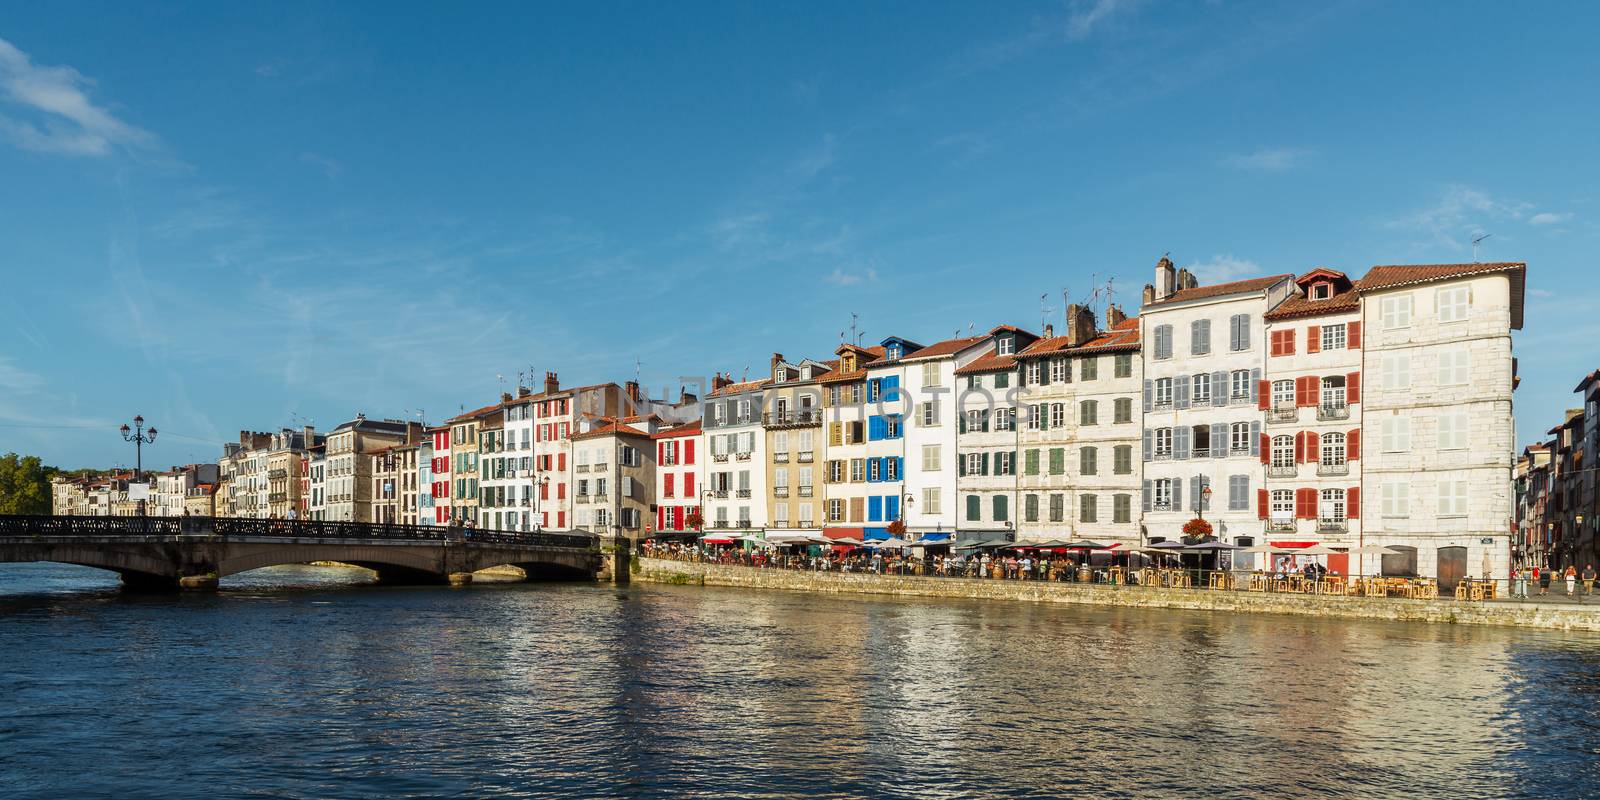 Colorful building facades along the Nive river, in Bayonne, France